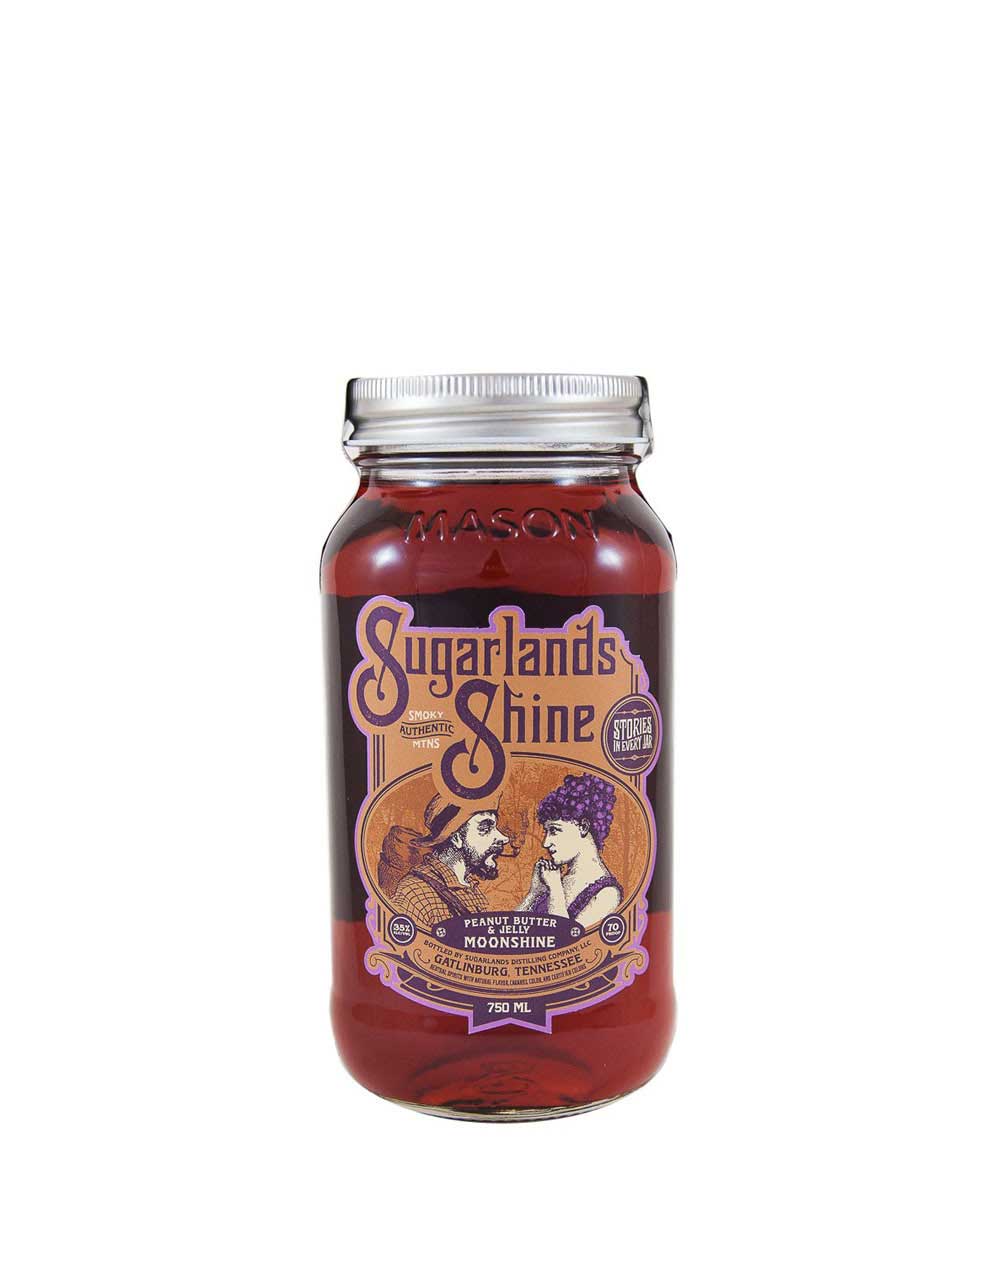 Sugarlands Peanut Butter & Jelly Moonshine